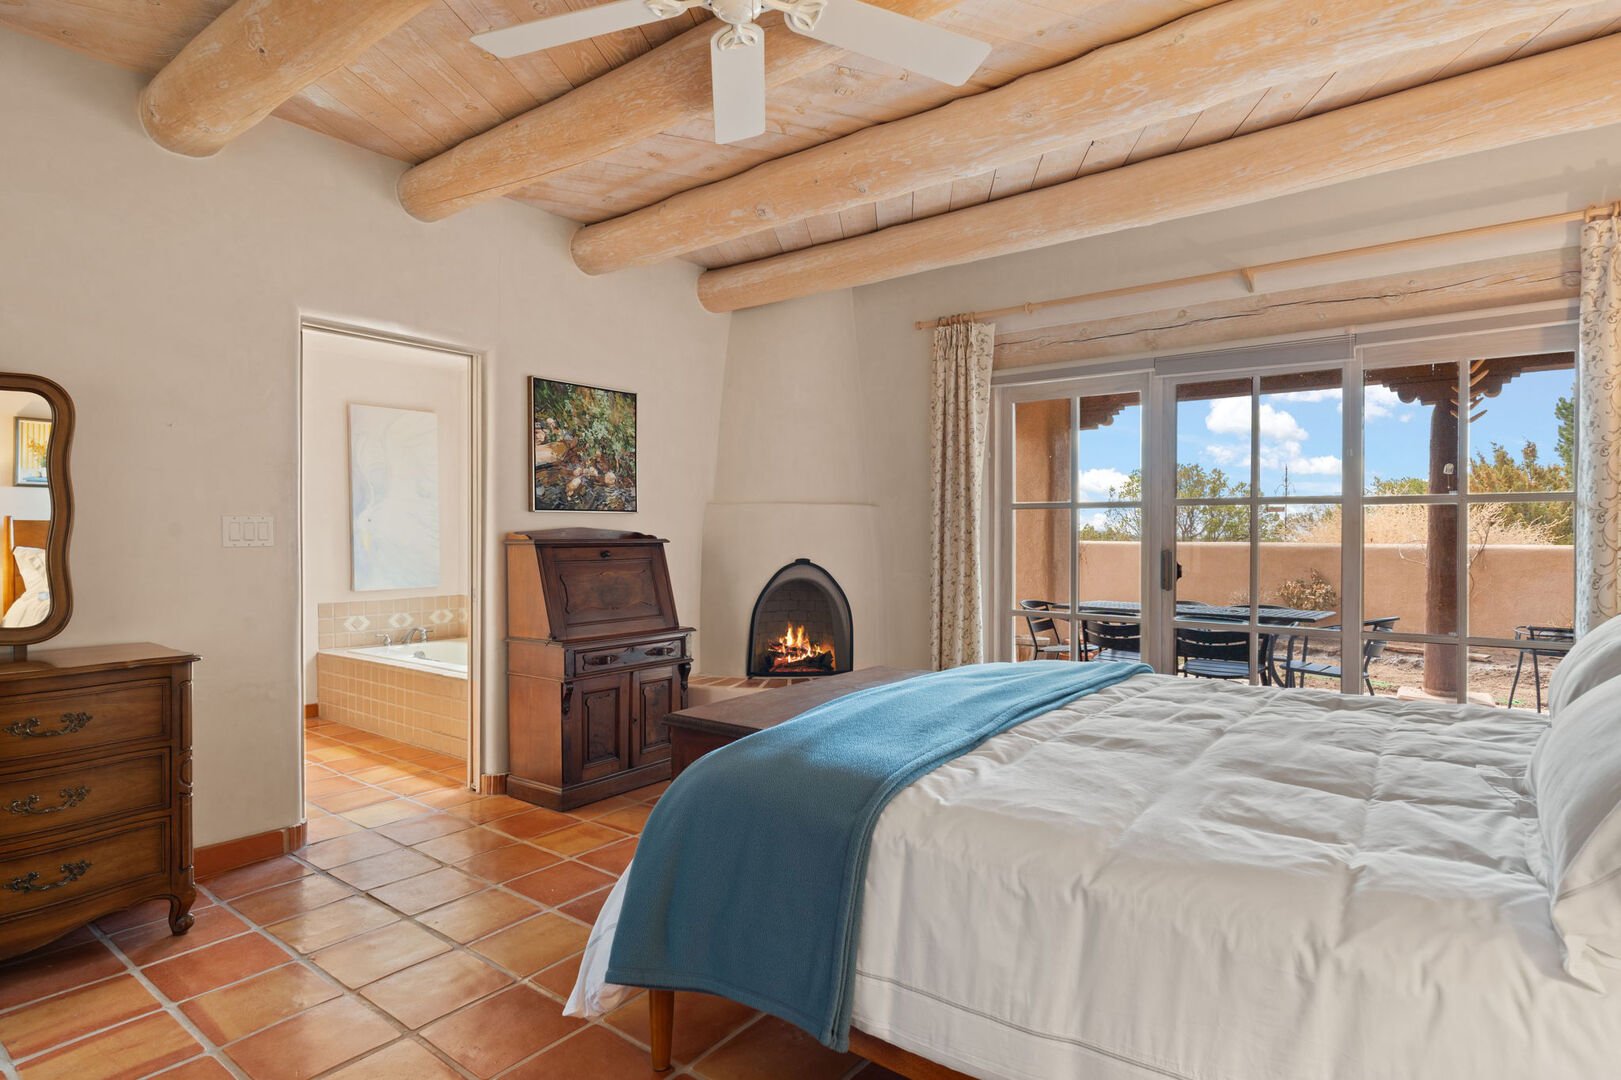 Retreat to the primary bedroom oasis with a plush king bed, a charming kiva fireplace (for decoration/not usable), tall white-washed lodge-pole ceilings, and sliding glass doors opening to a private backyard retreat.